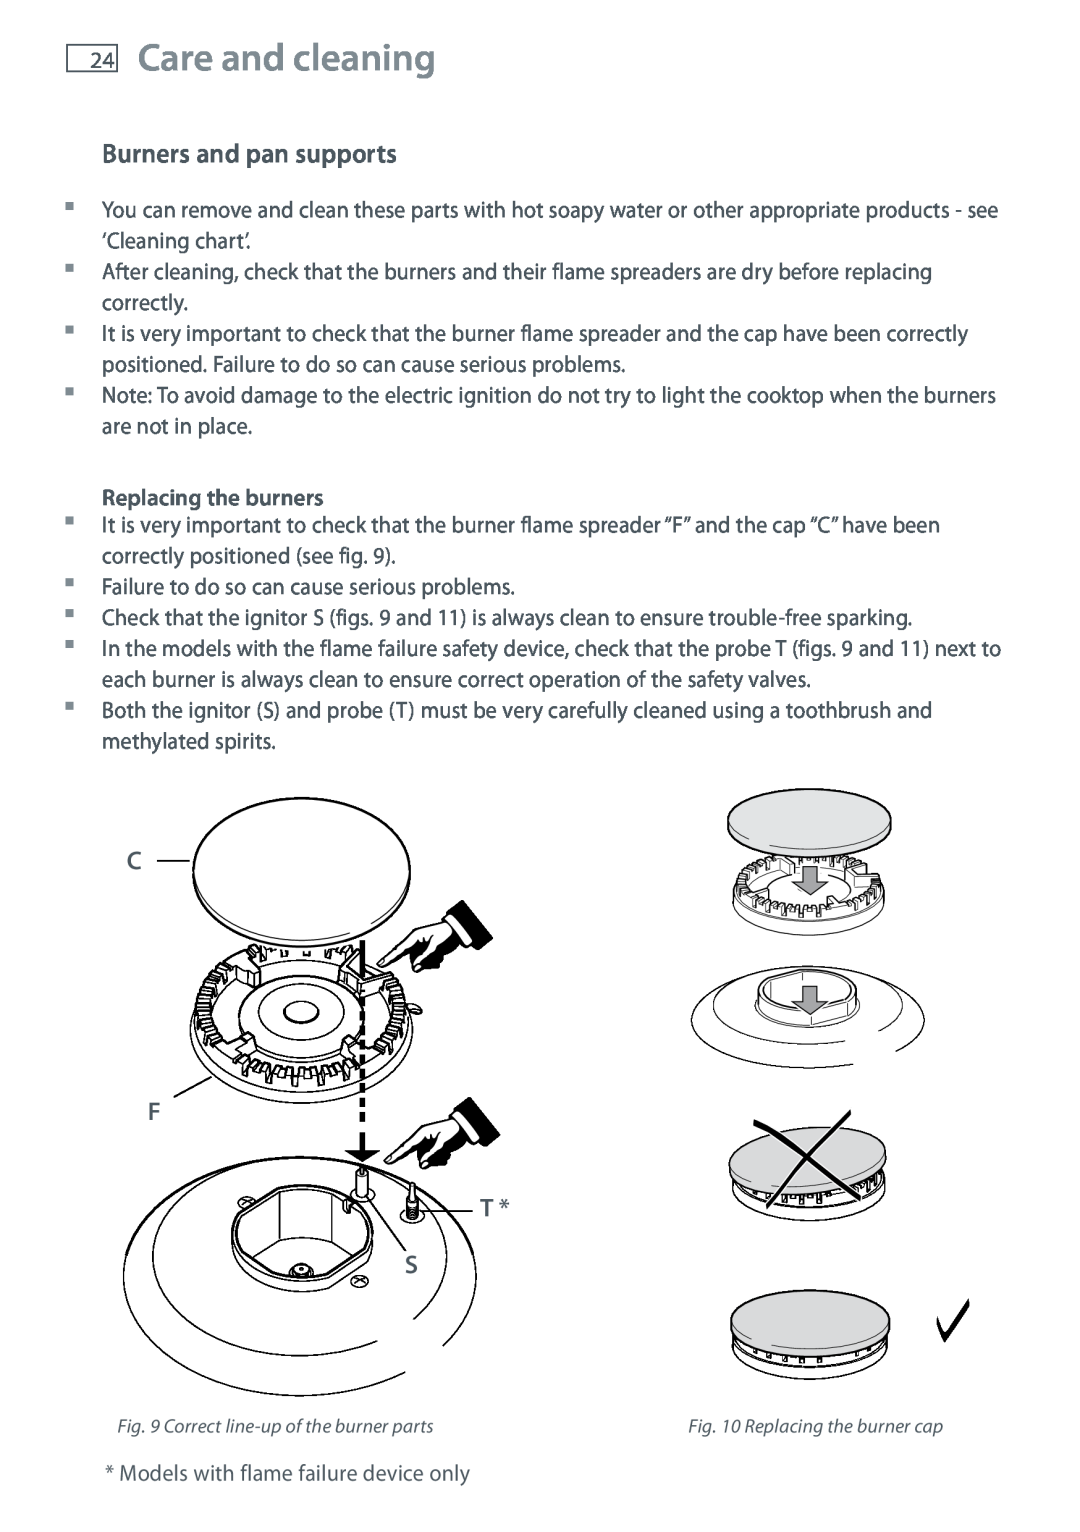 Fisher & Paykel CG604 installation instructions Burners and pan supports, C F T S, Care and cleaning 